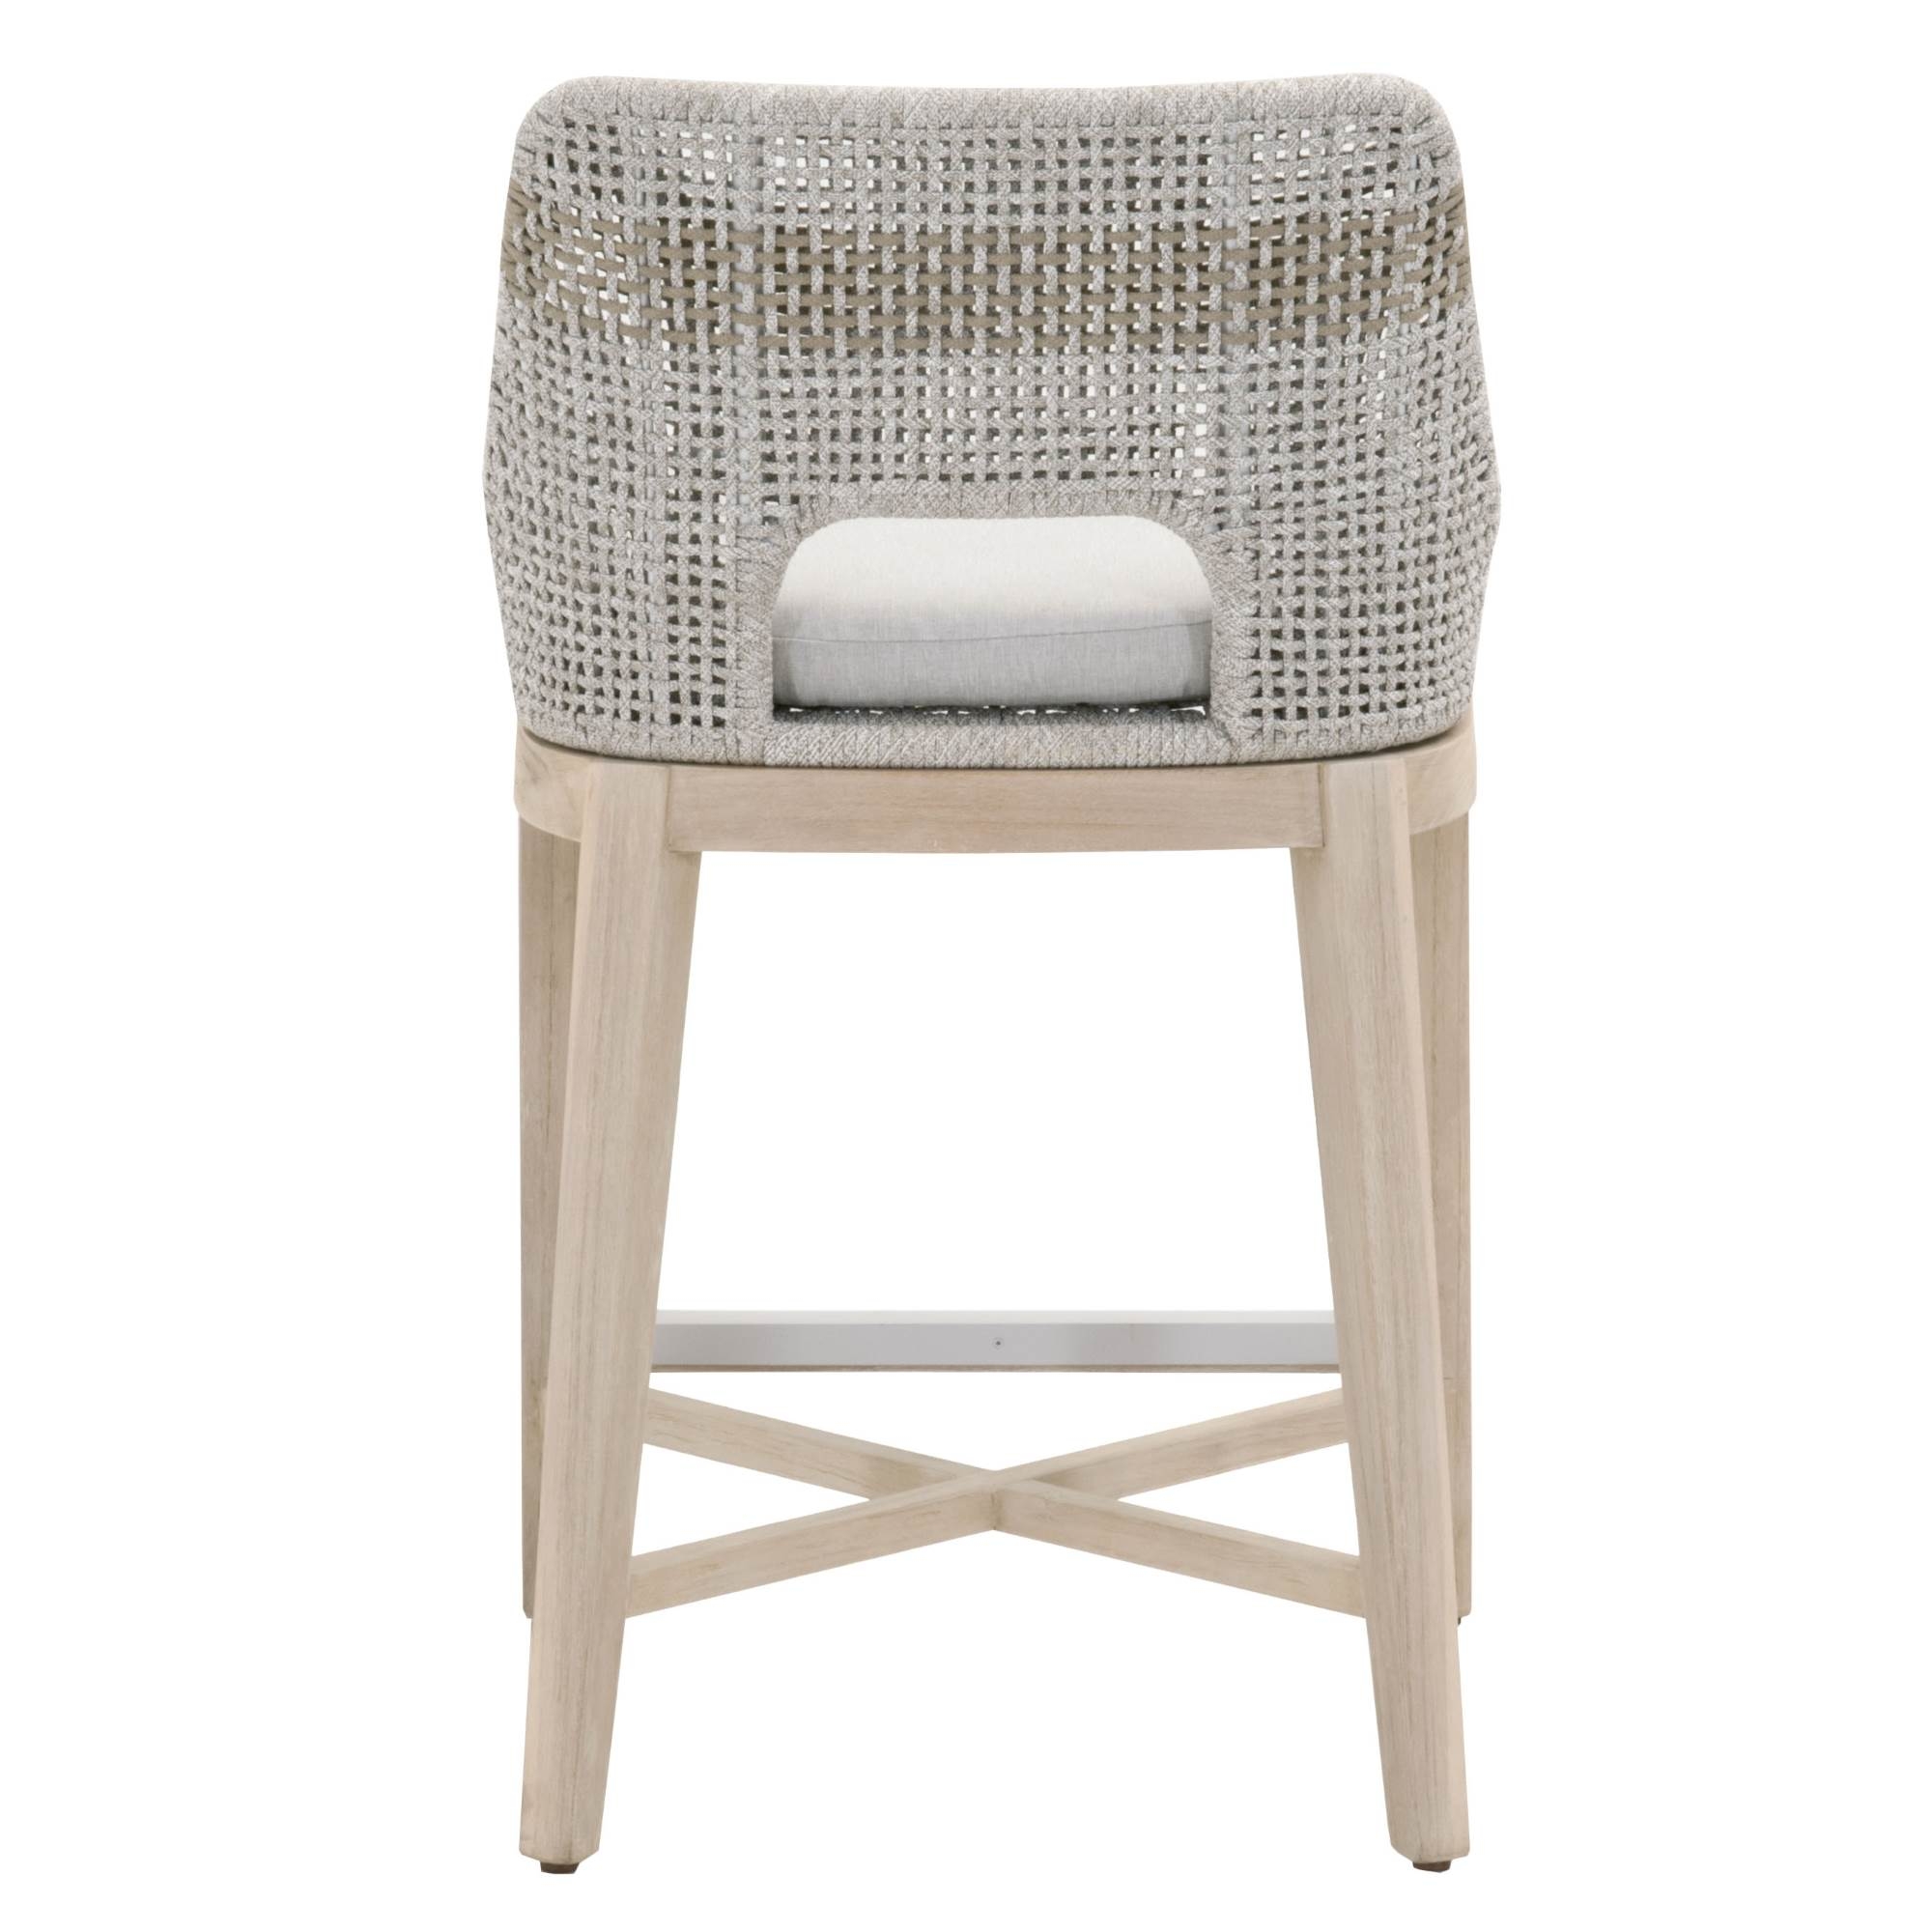 Tapestry Outdoor Counter Stool, Gray - Image 4